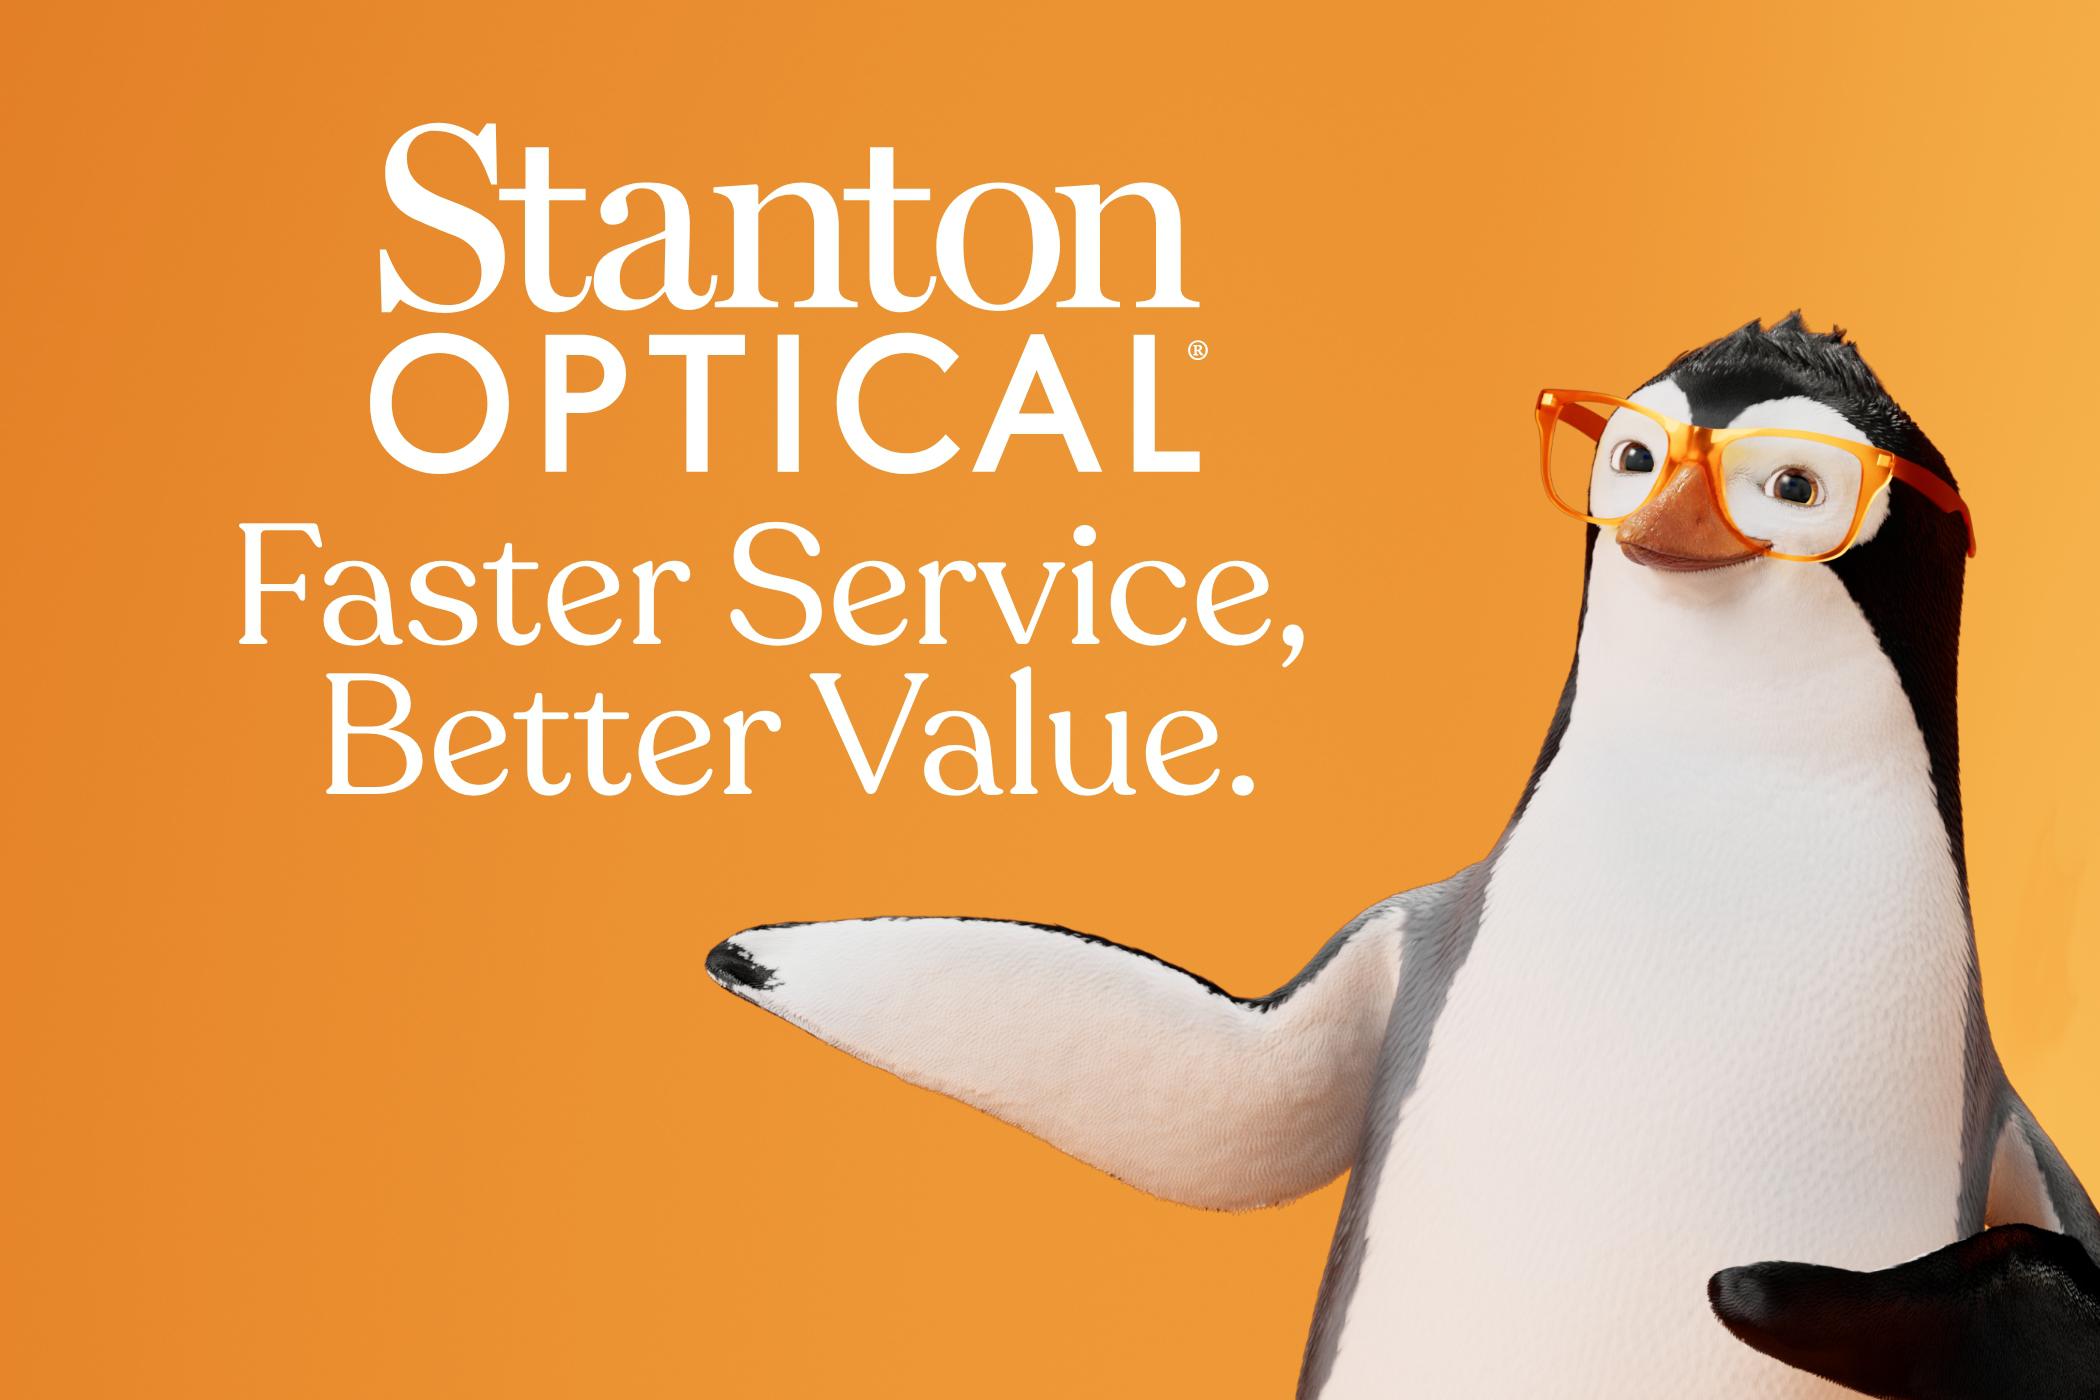 We are Stanton Optical: Faster Service, Better Value.